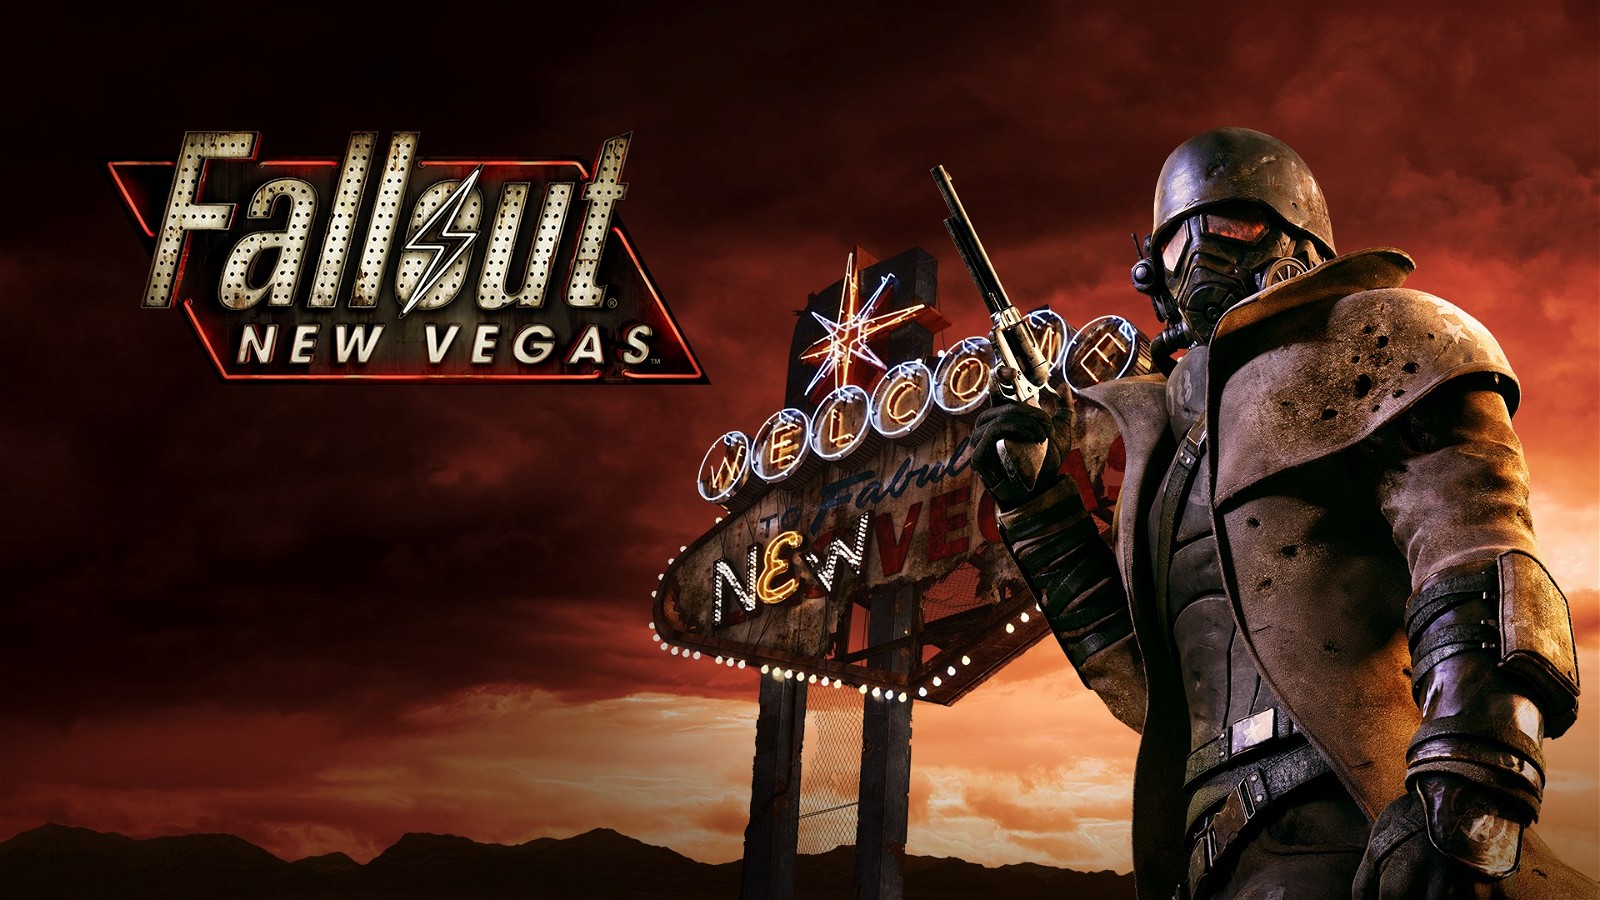 Fallout: New Vegas fans are not happy with the series.